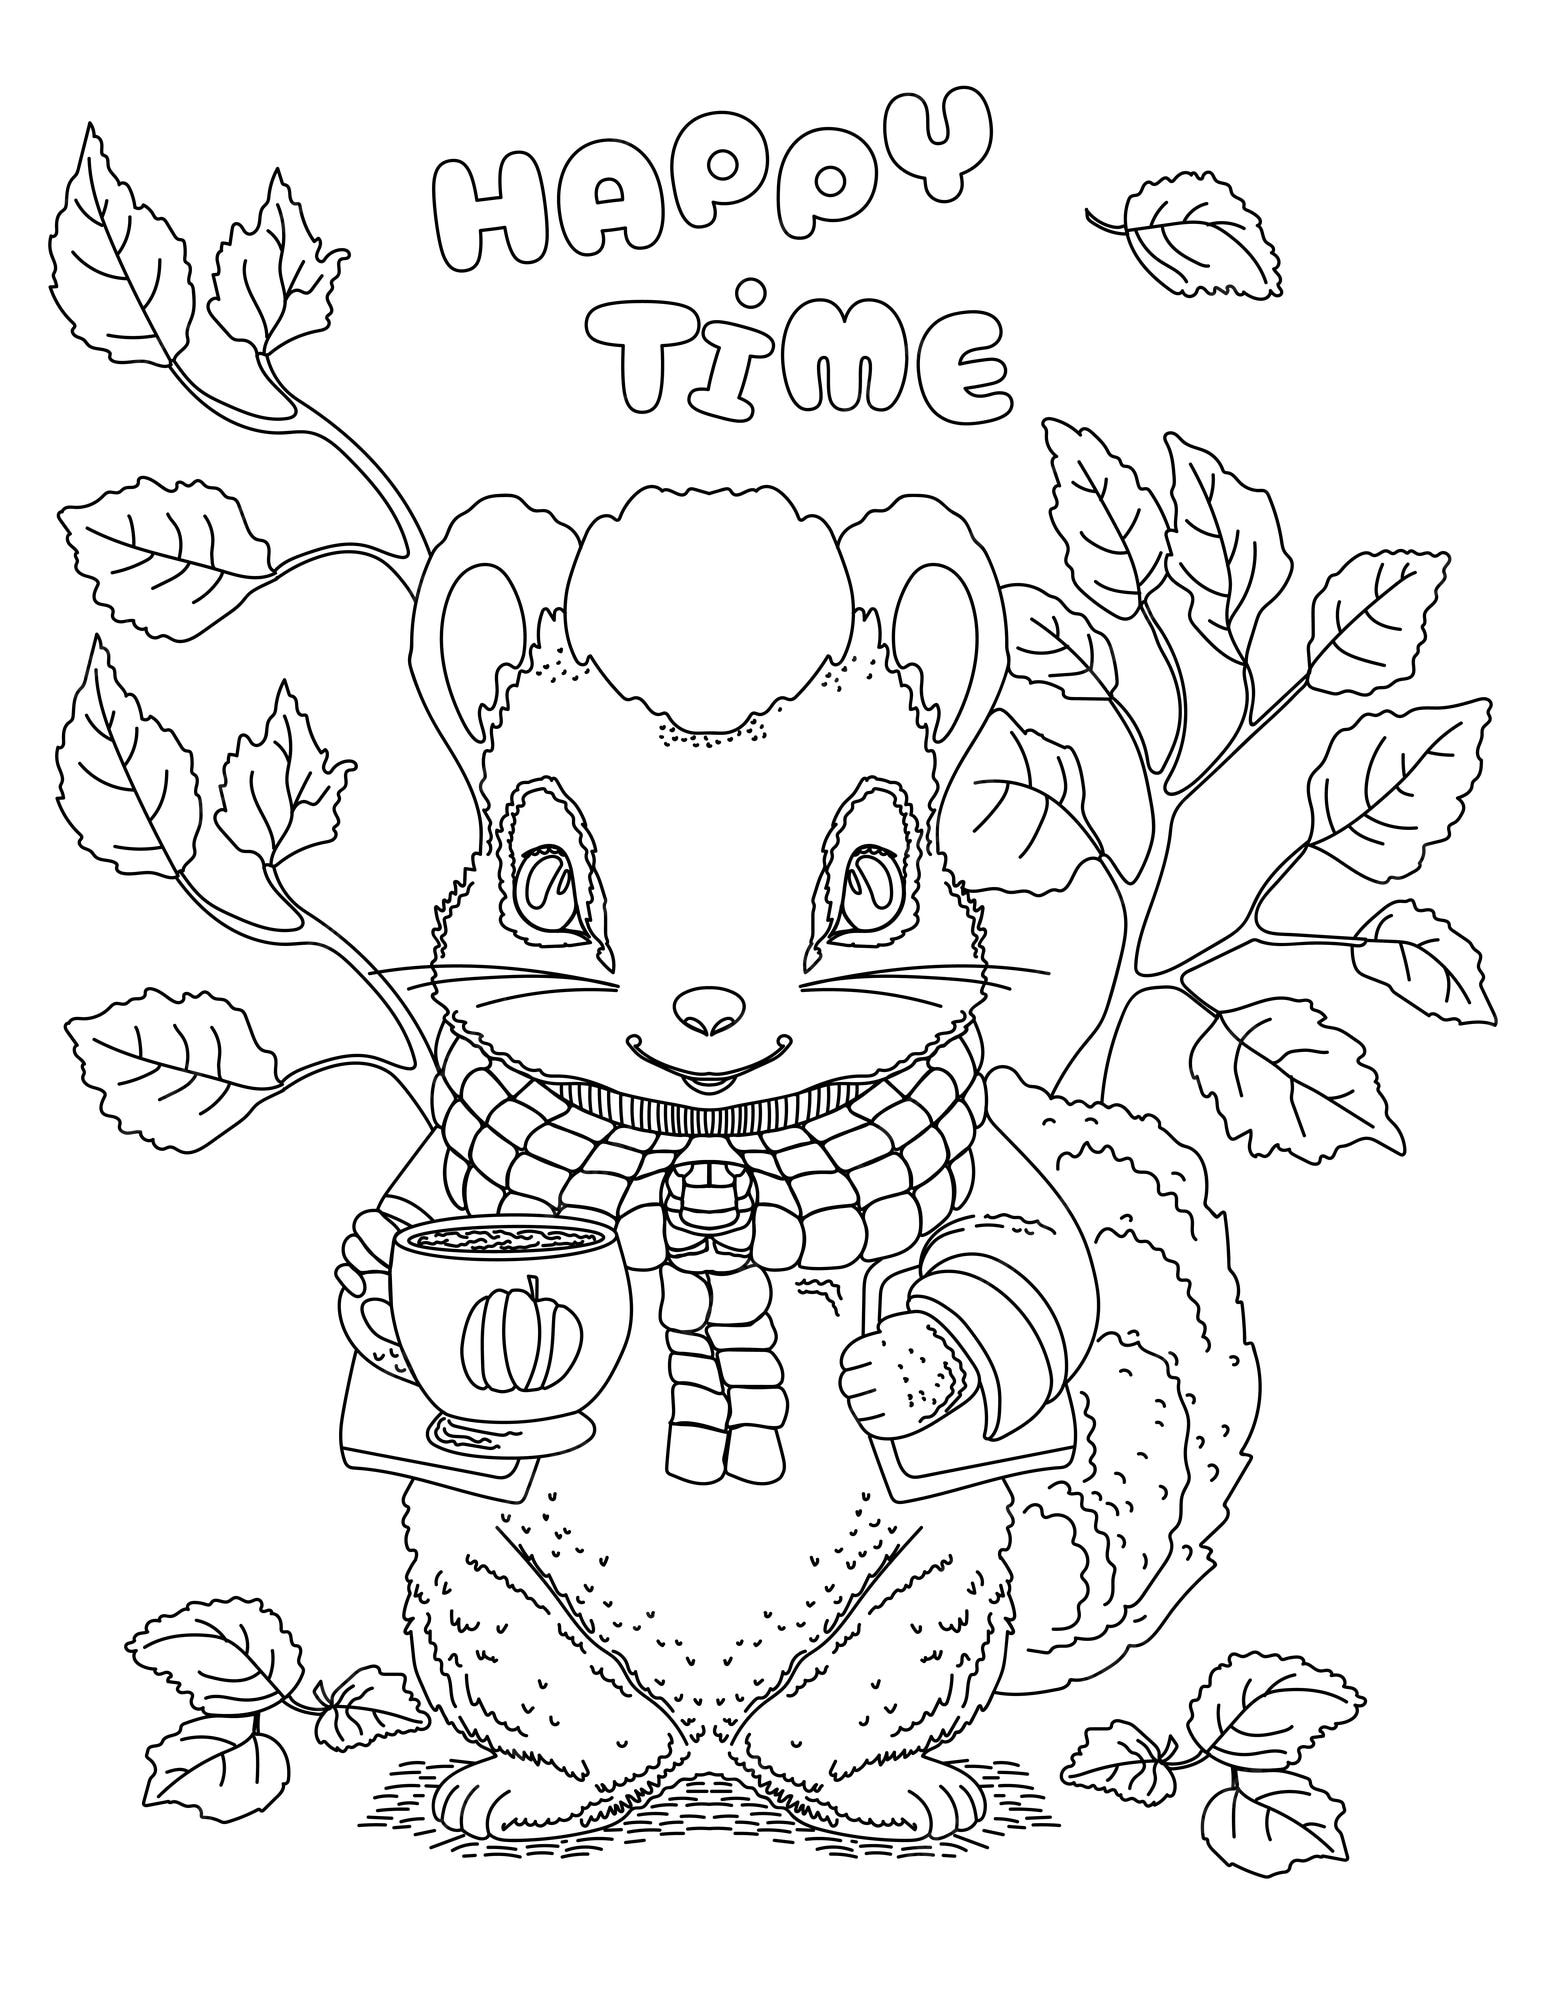 Premium vector vector hand drawn coloring page illustration for autumn celebration with cute squirrel character